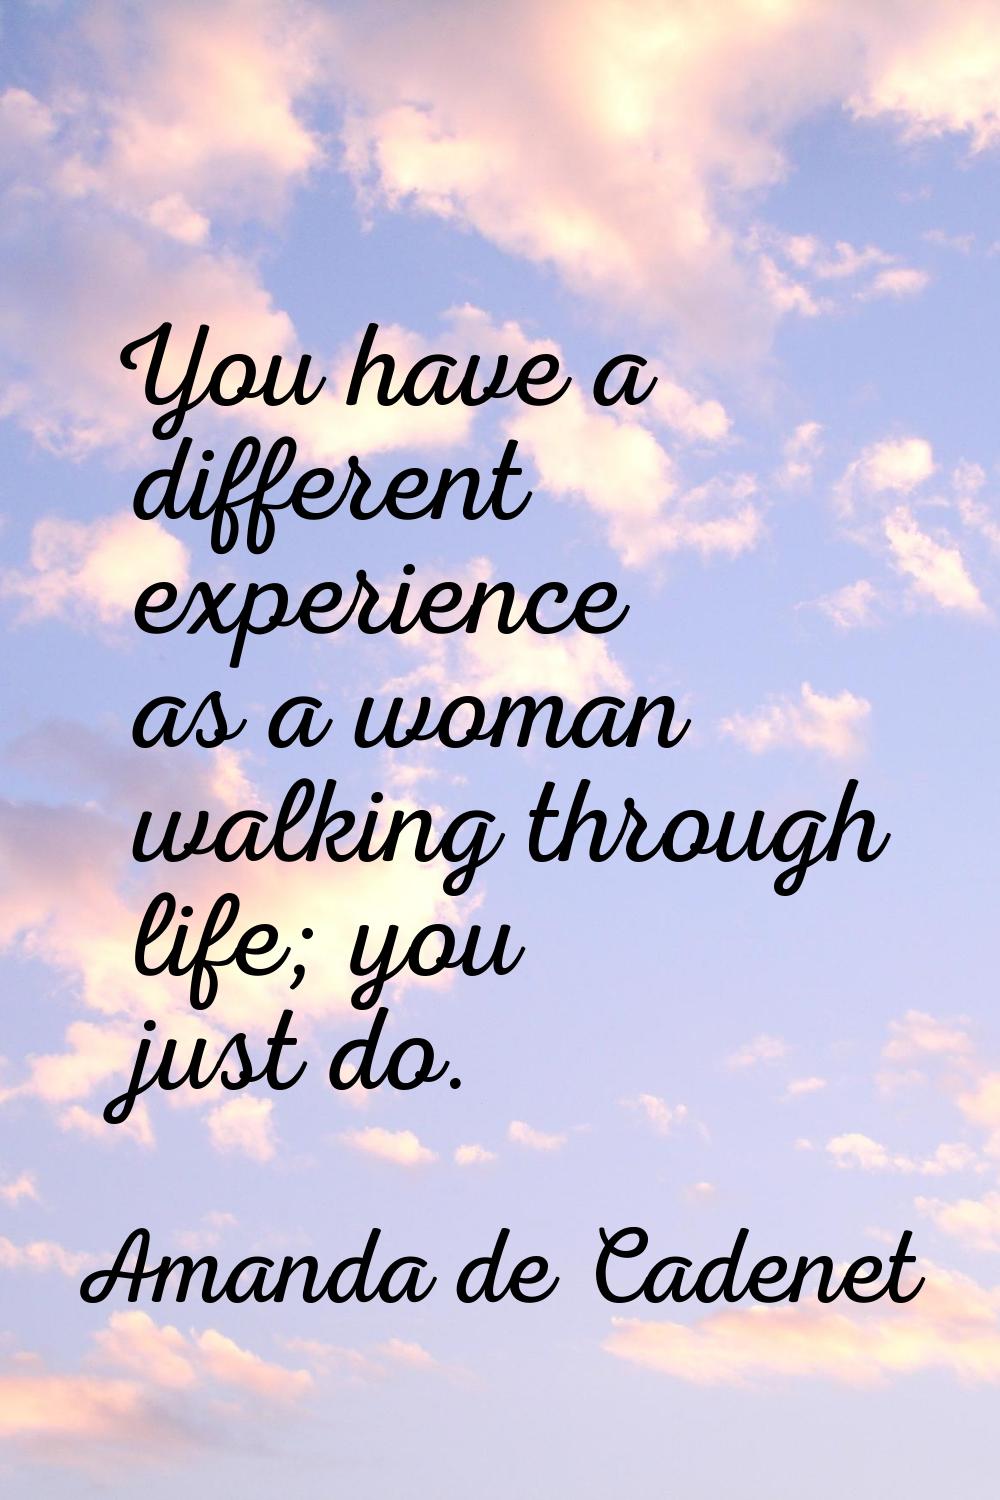 You have a different experience as a woman walking through life; you just do.